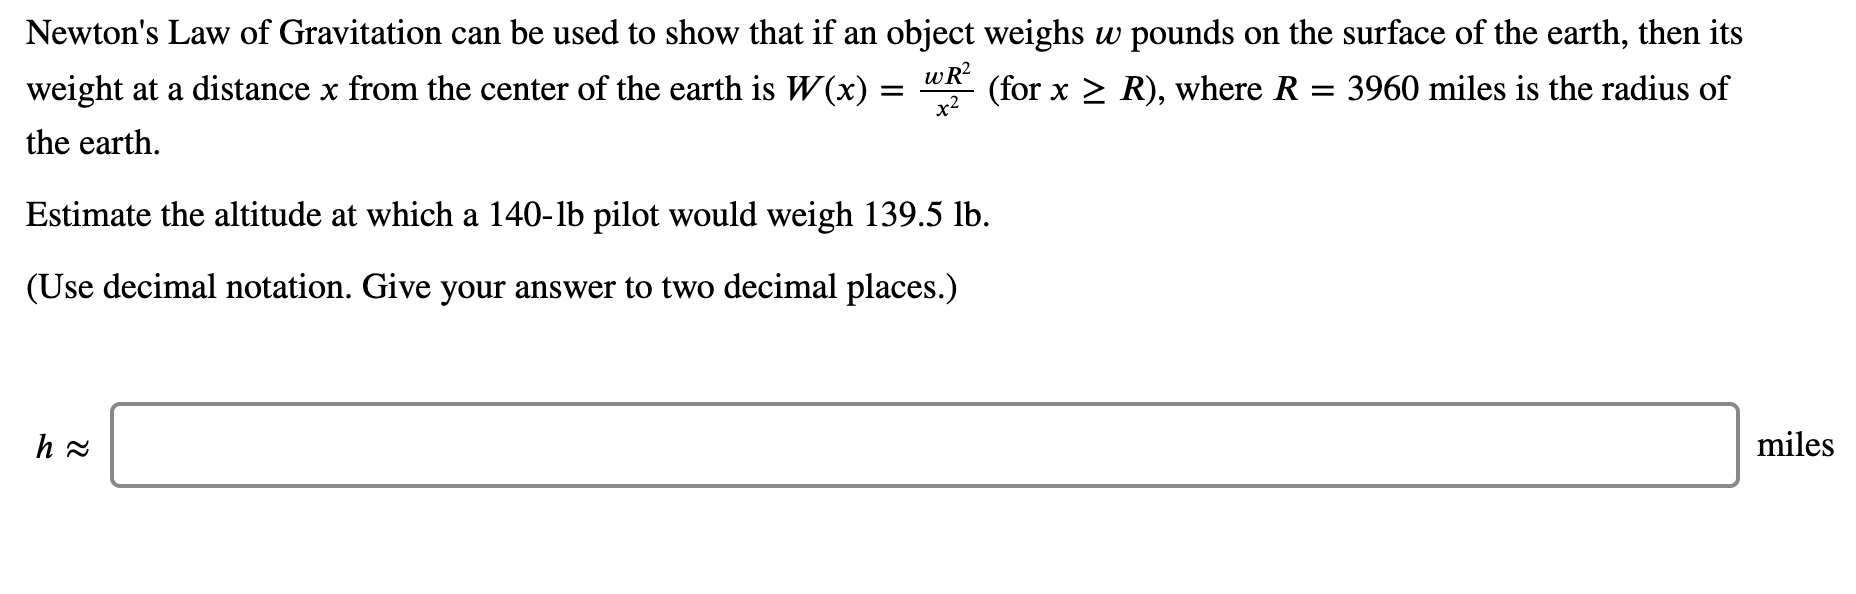 Newton's Law of Gravitation can be used to show that if an object weighs w pounds on the surface of the earth, then its
weight at a distance x from the center of the earth is W(x) =
wR?
(for x > R), where R = 3960 miles is the radius of
the earth.
Estimate the altitude at which a 140-lb pilot would weigh 139.5 lb.
(Use decimal notation. Give your answer to two decimal places.)
